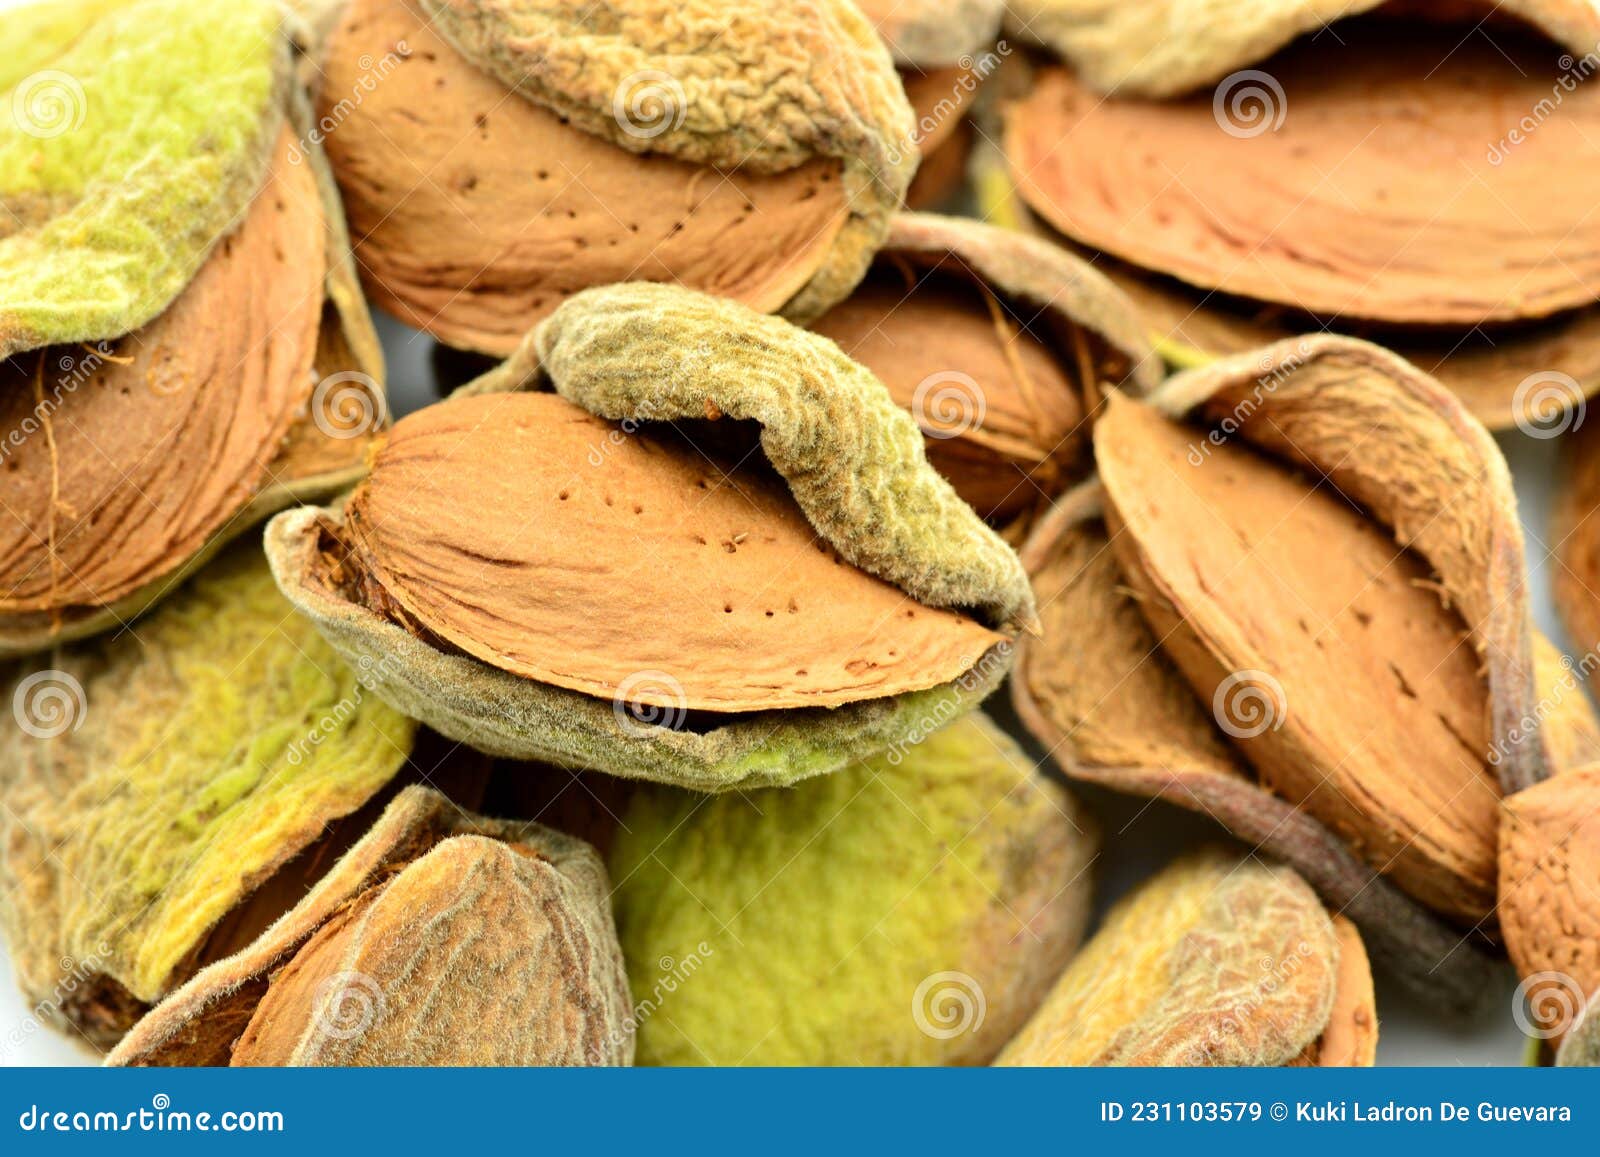 detail of freshly picked almonds